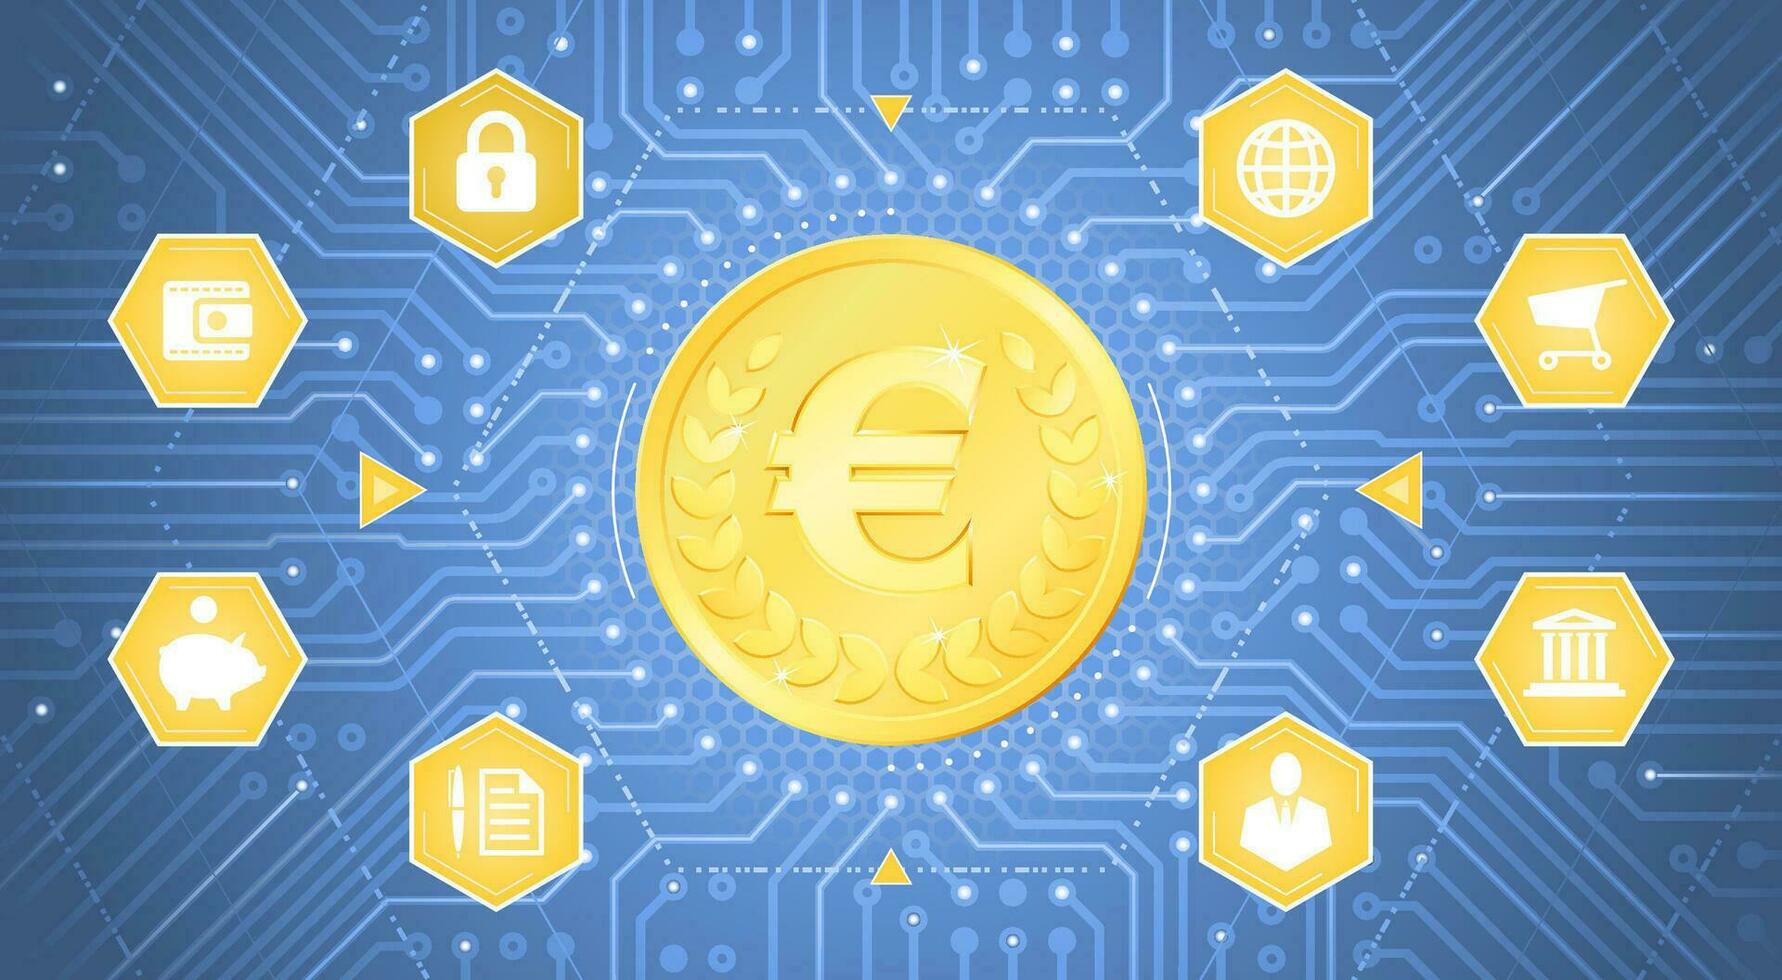 Digital Euro. A metallic coin with the Euro symbol on it in electronic cyberspace. Graphic composition on the theme of Crypto-Currencies. vector